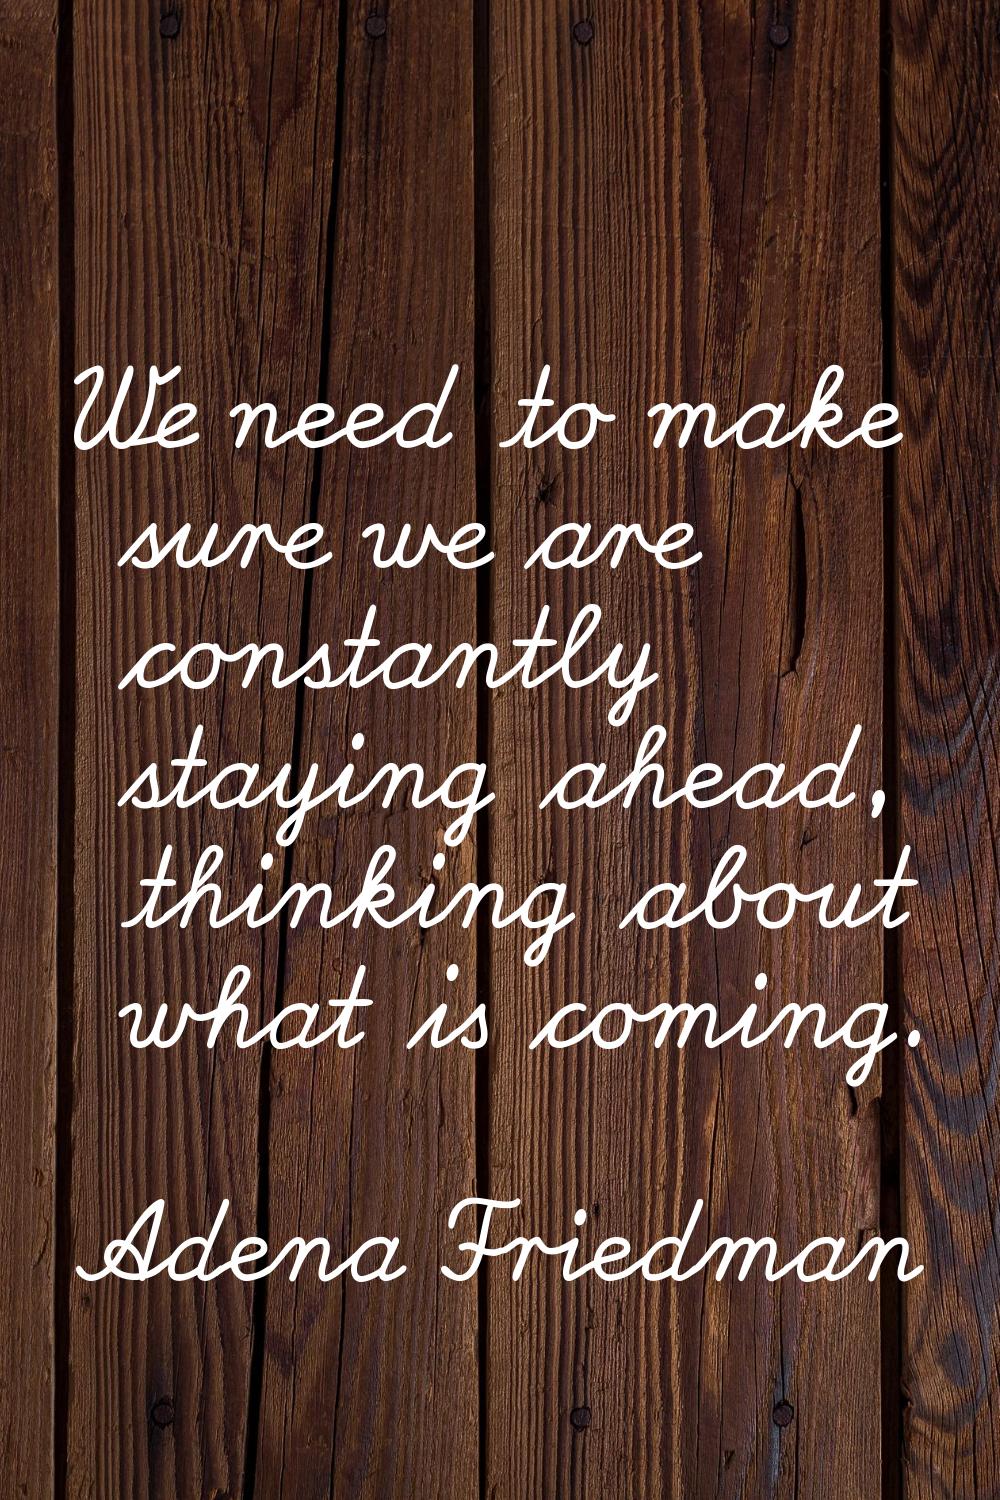 We need to make sure we are constantly staying ahead, thinking about what is coming.